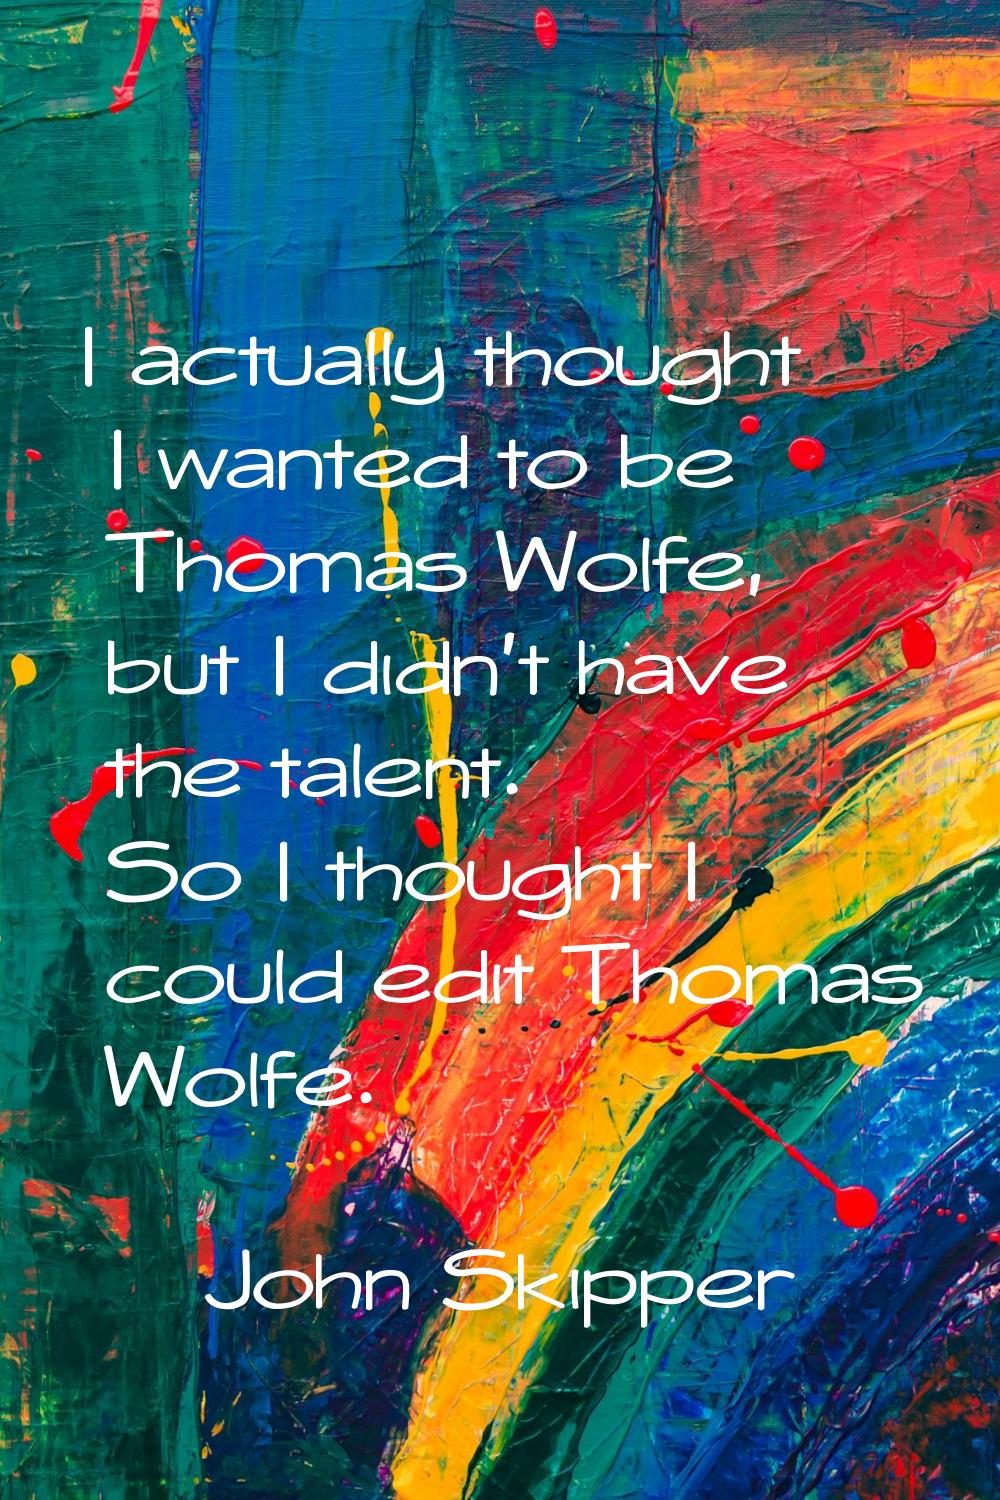 I actually thought I wanted to be Thomas Wolfe, but I didn't have the talent. So I thought I could 